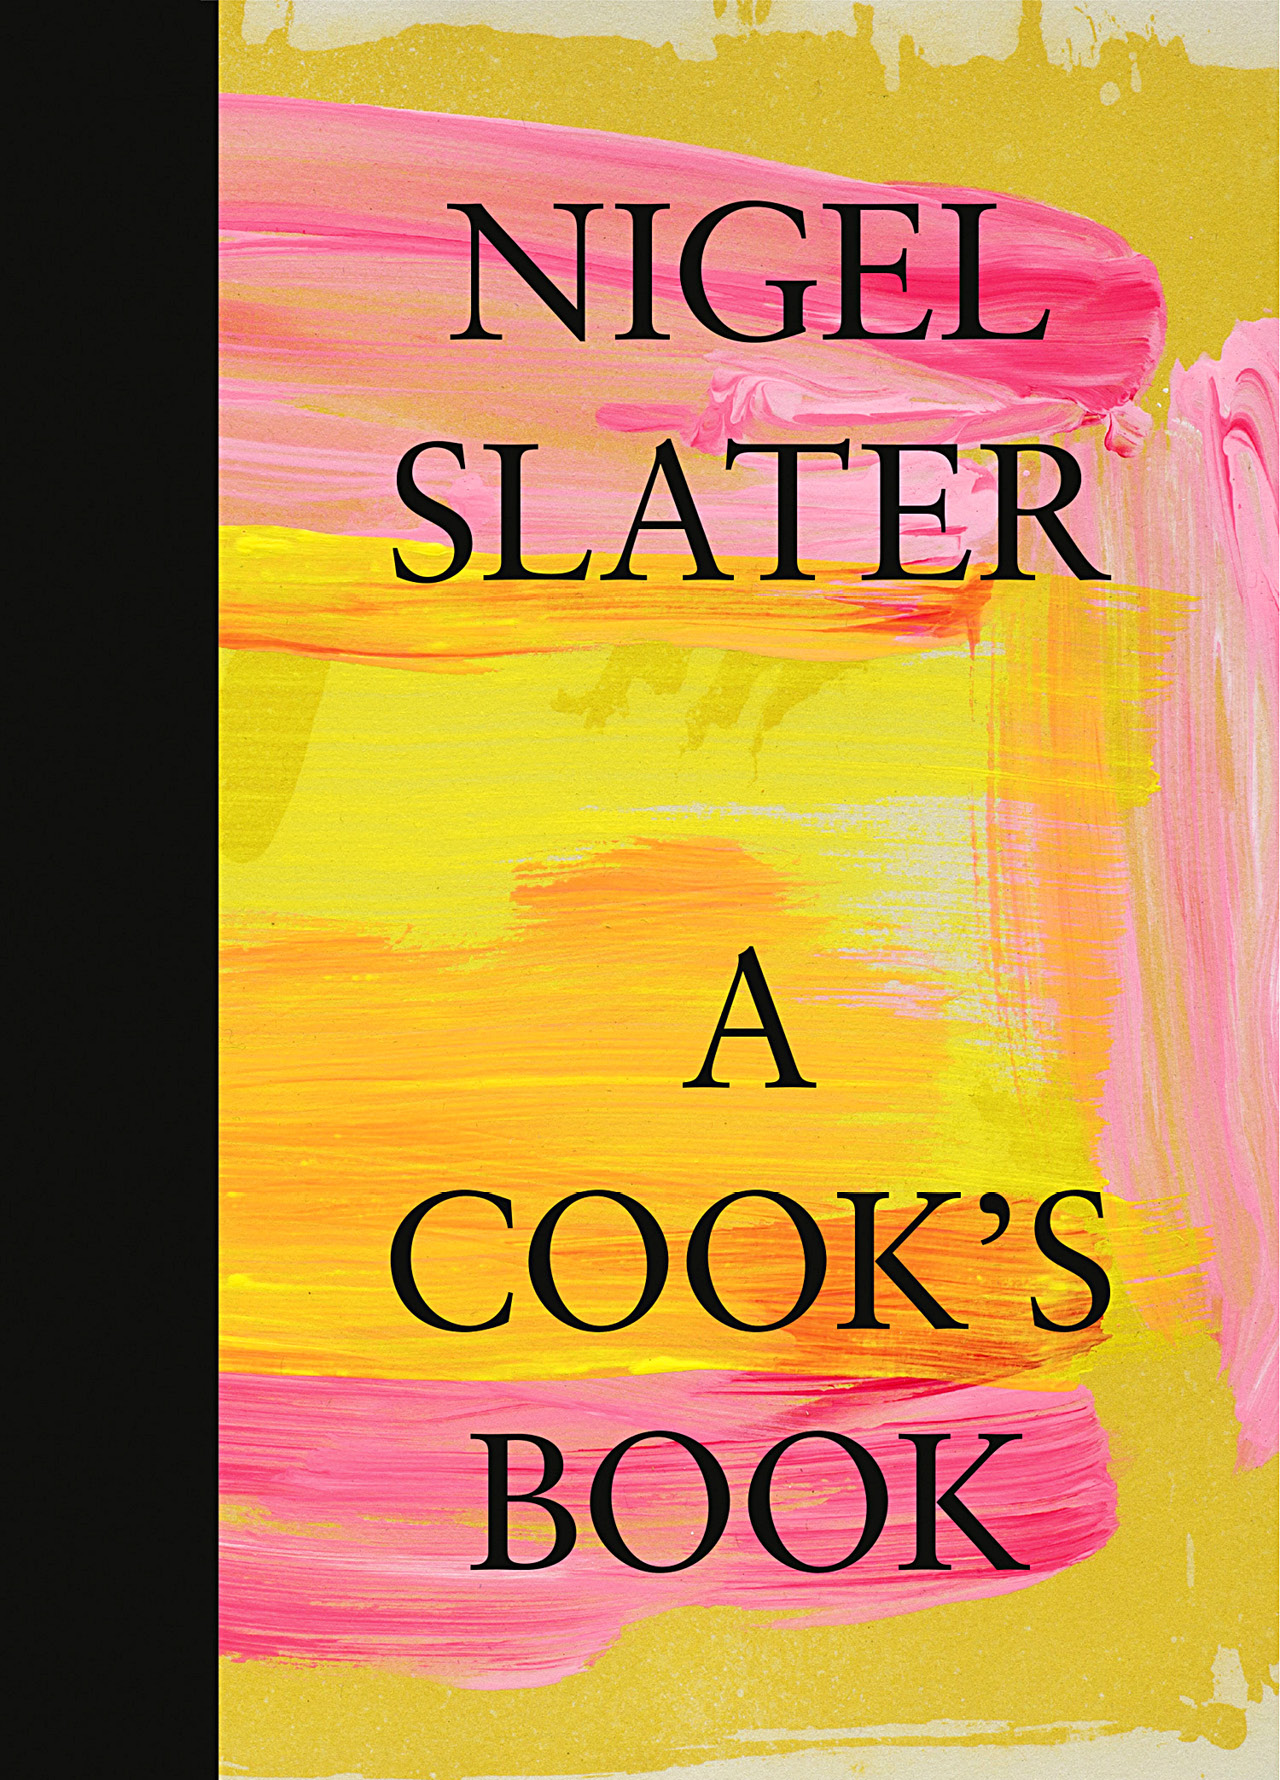 the cover of Nigel Slater's book A Cook's Book